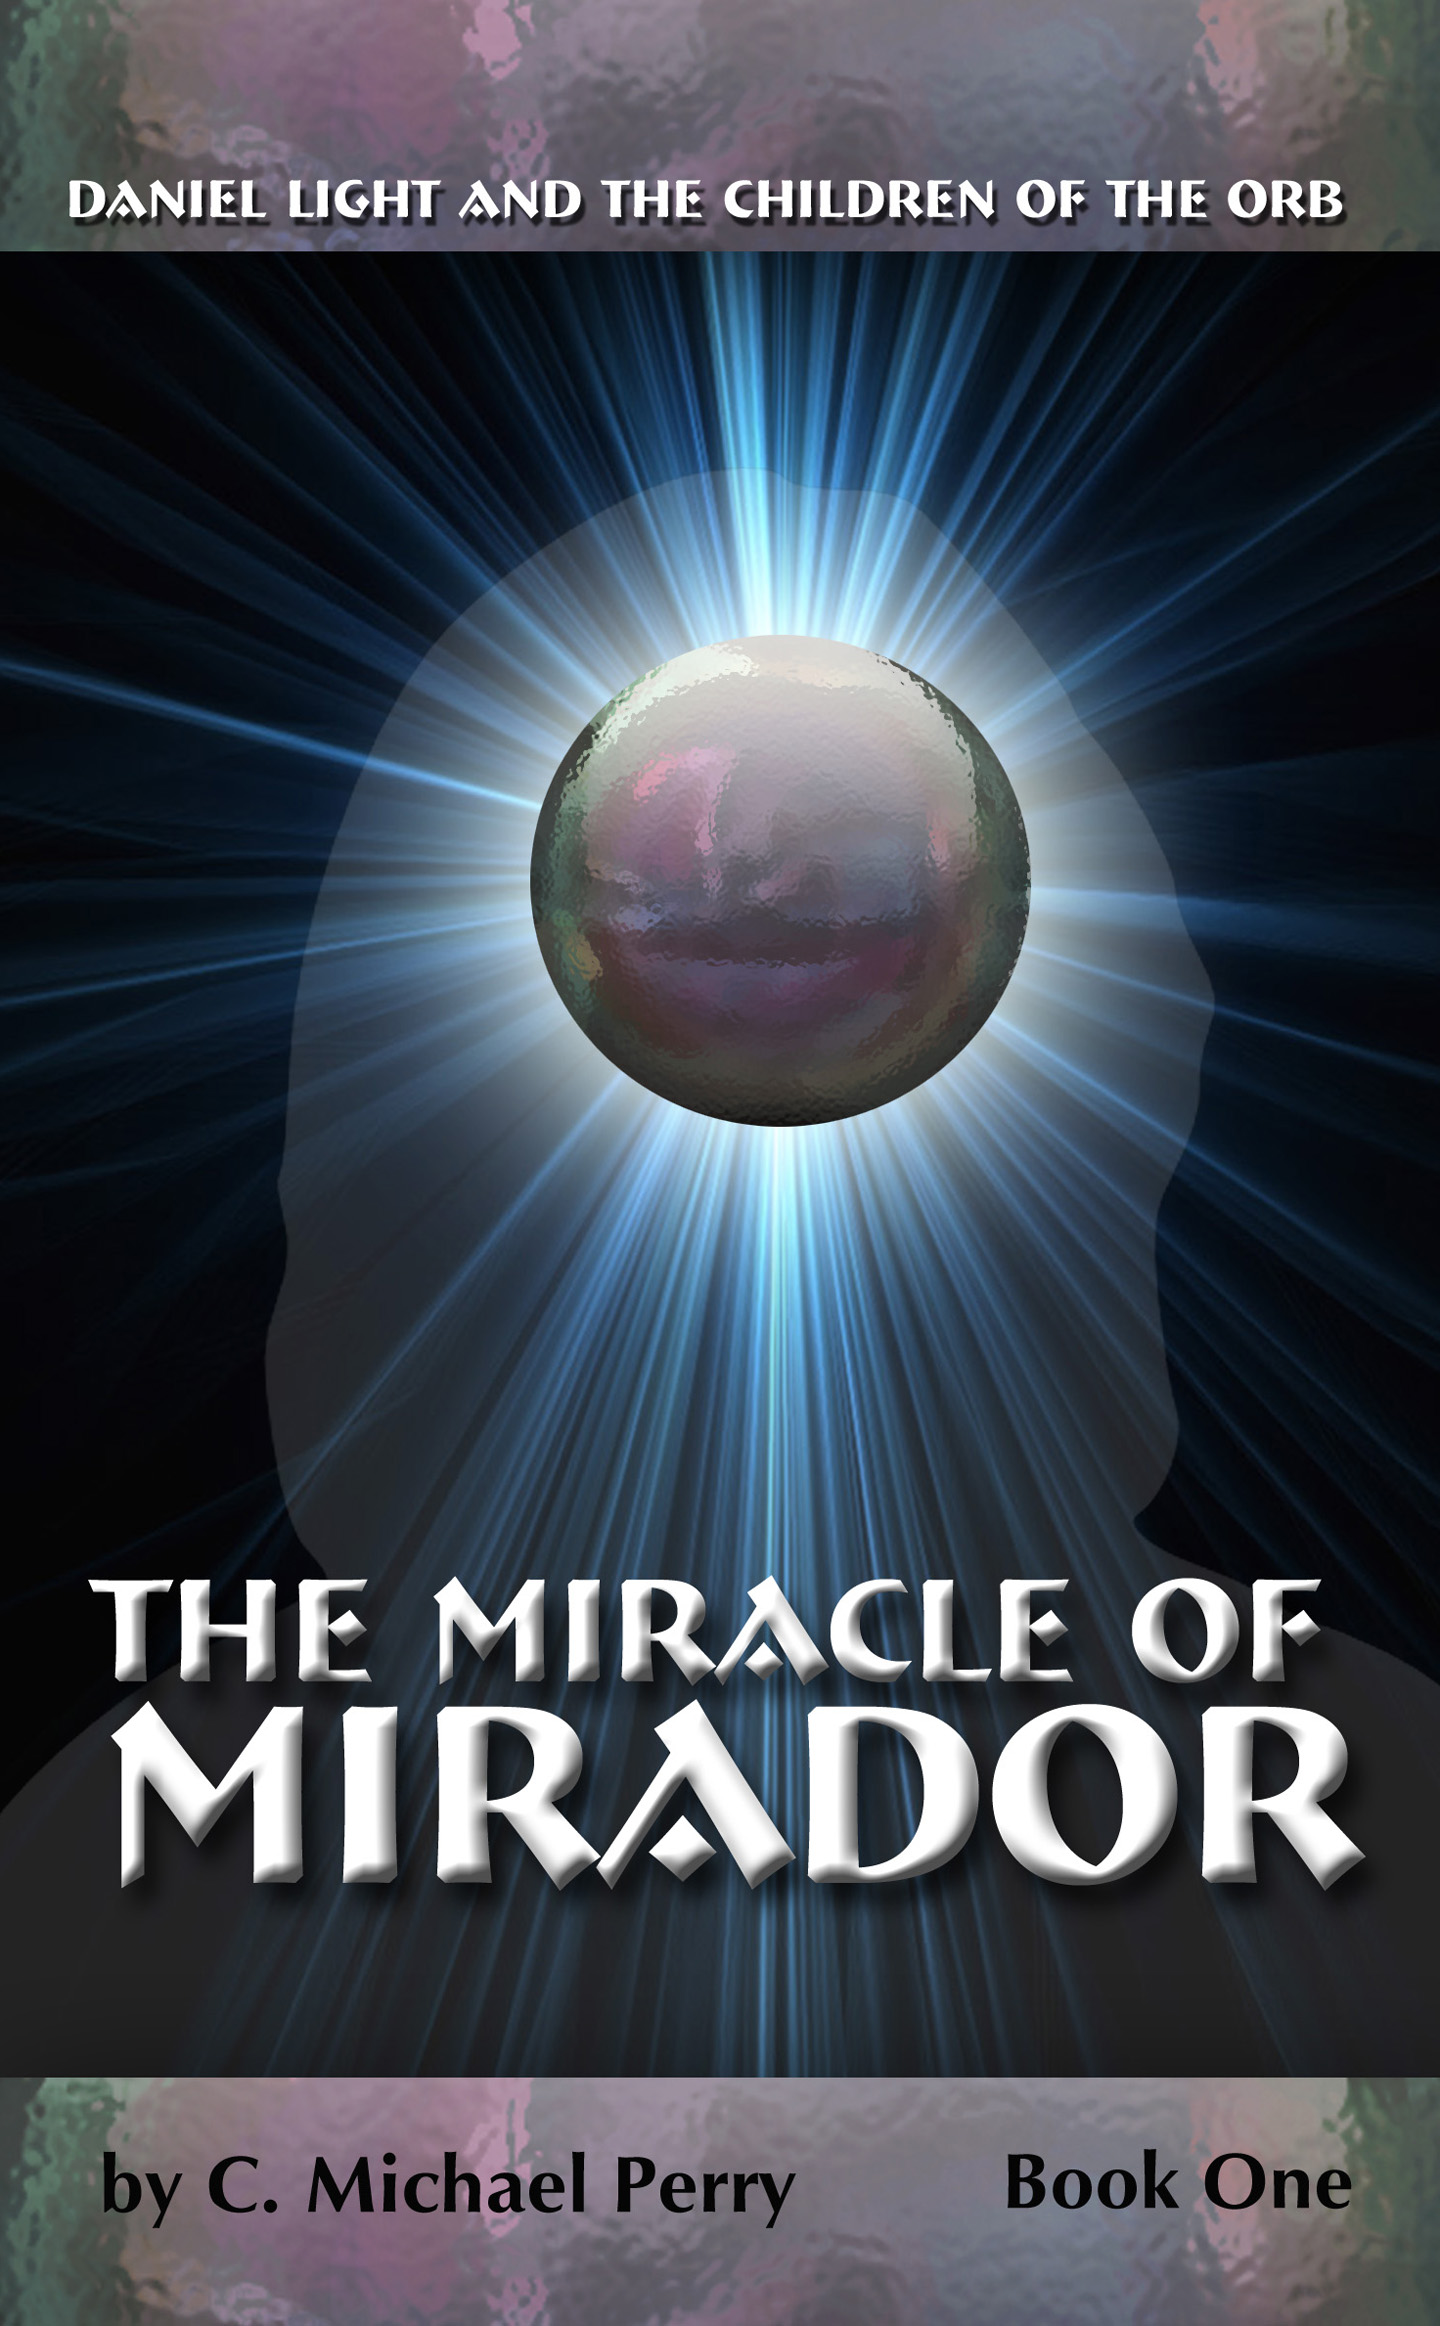 Daniel Light and the Miracle of Mirador: Book 1